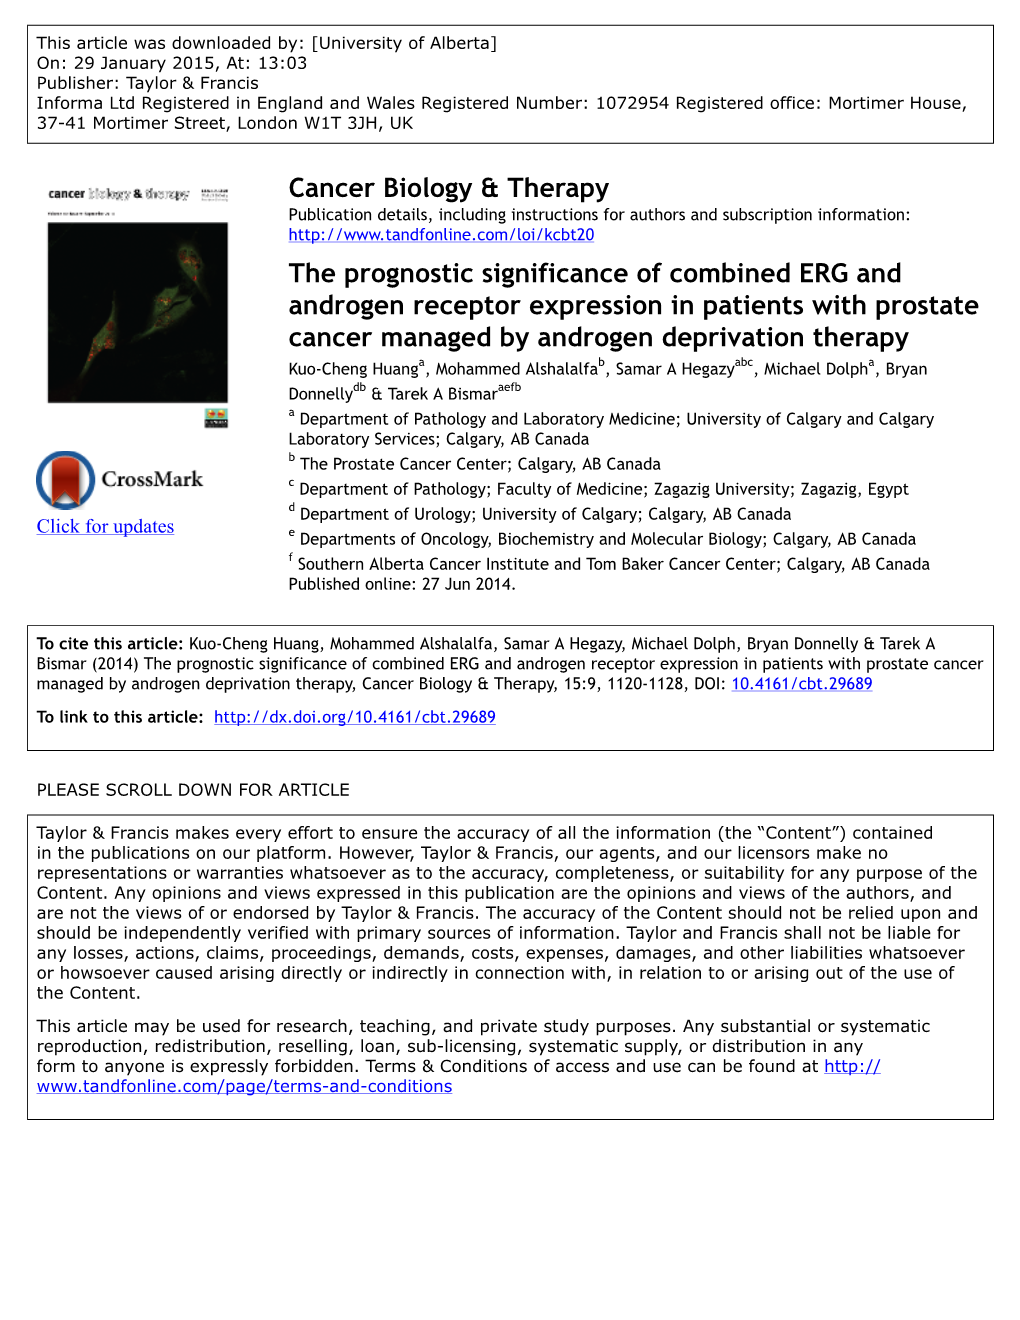 Cancer Biology & Therapy the Prognostic Significance of Combined